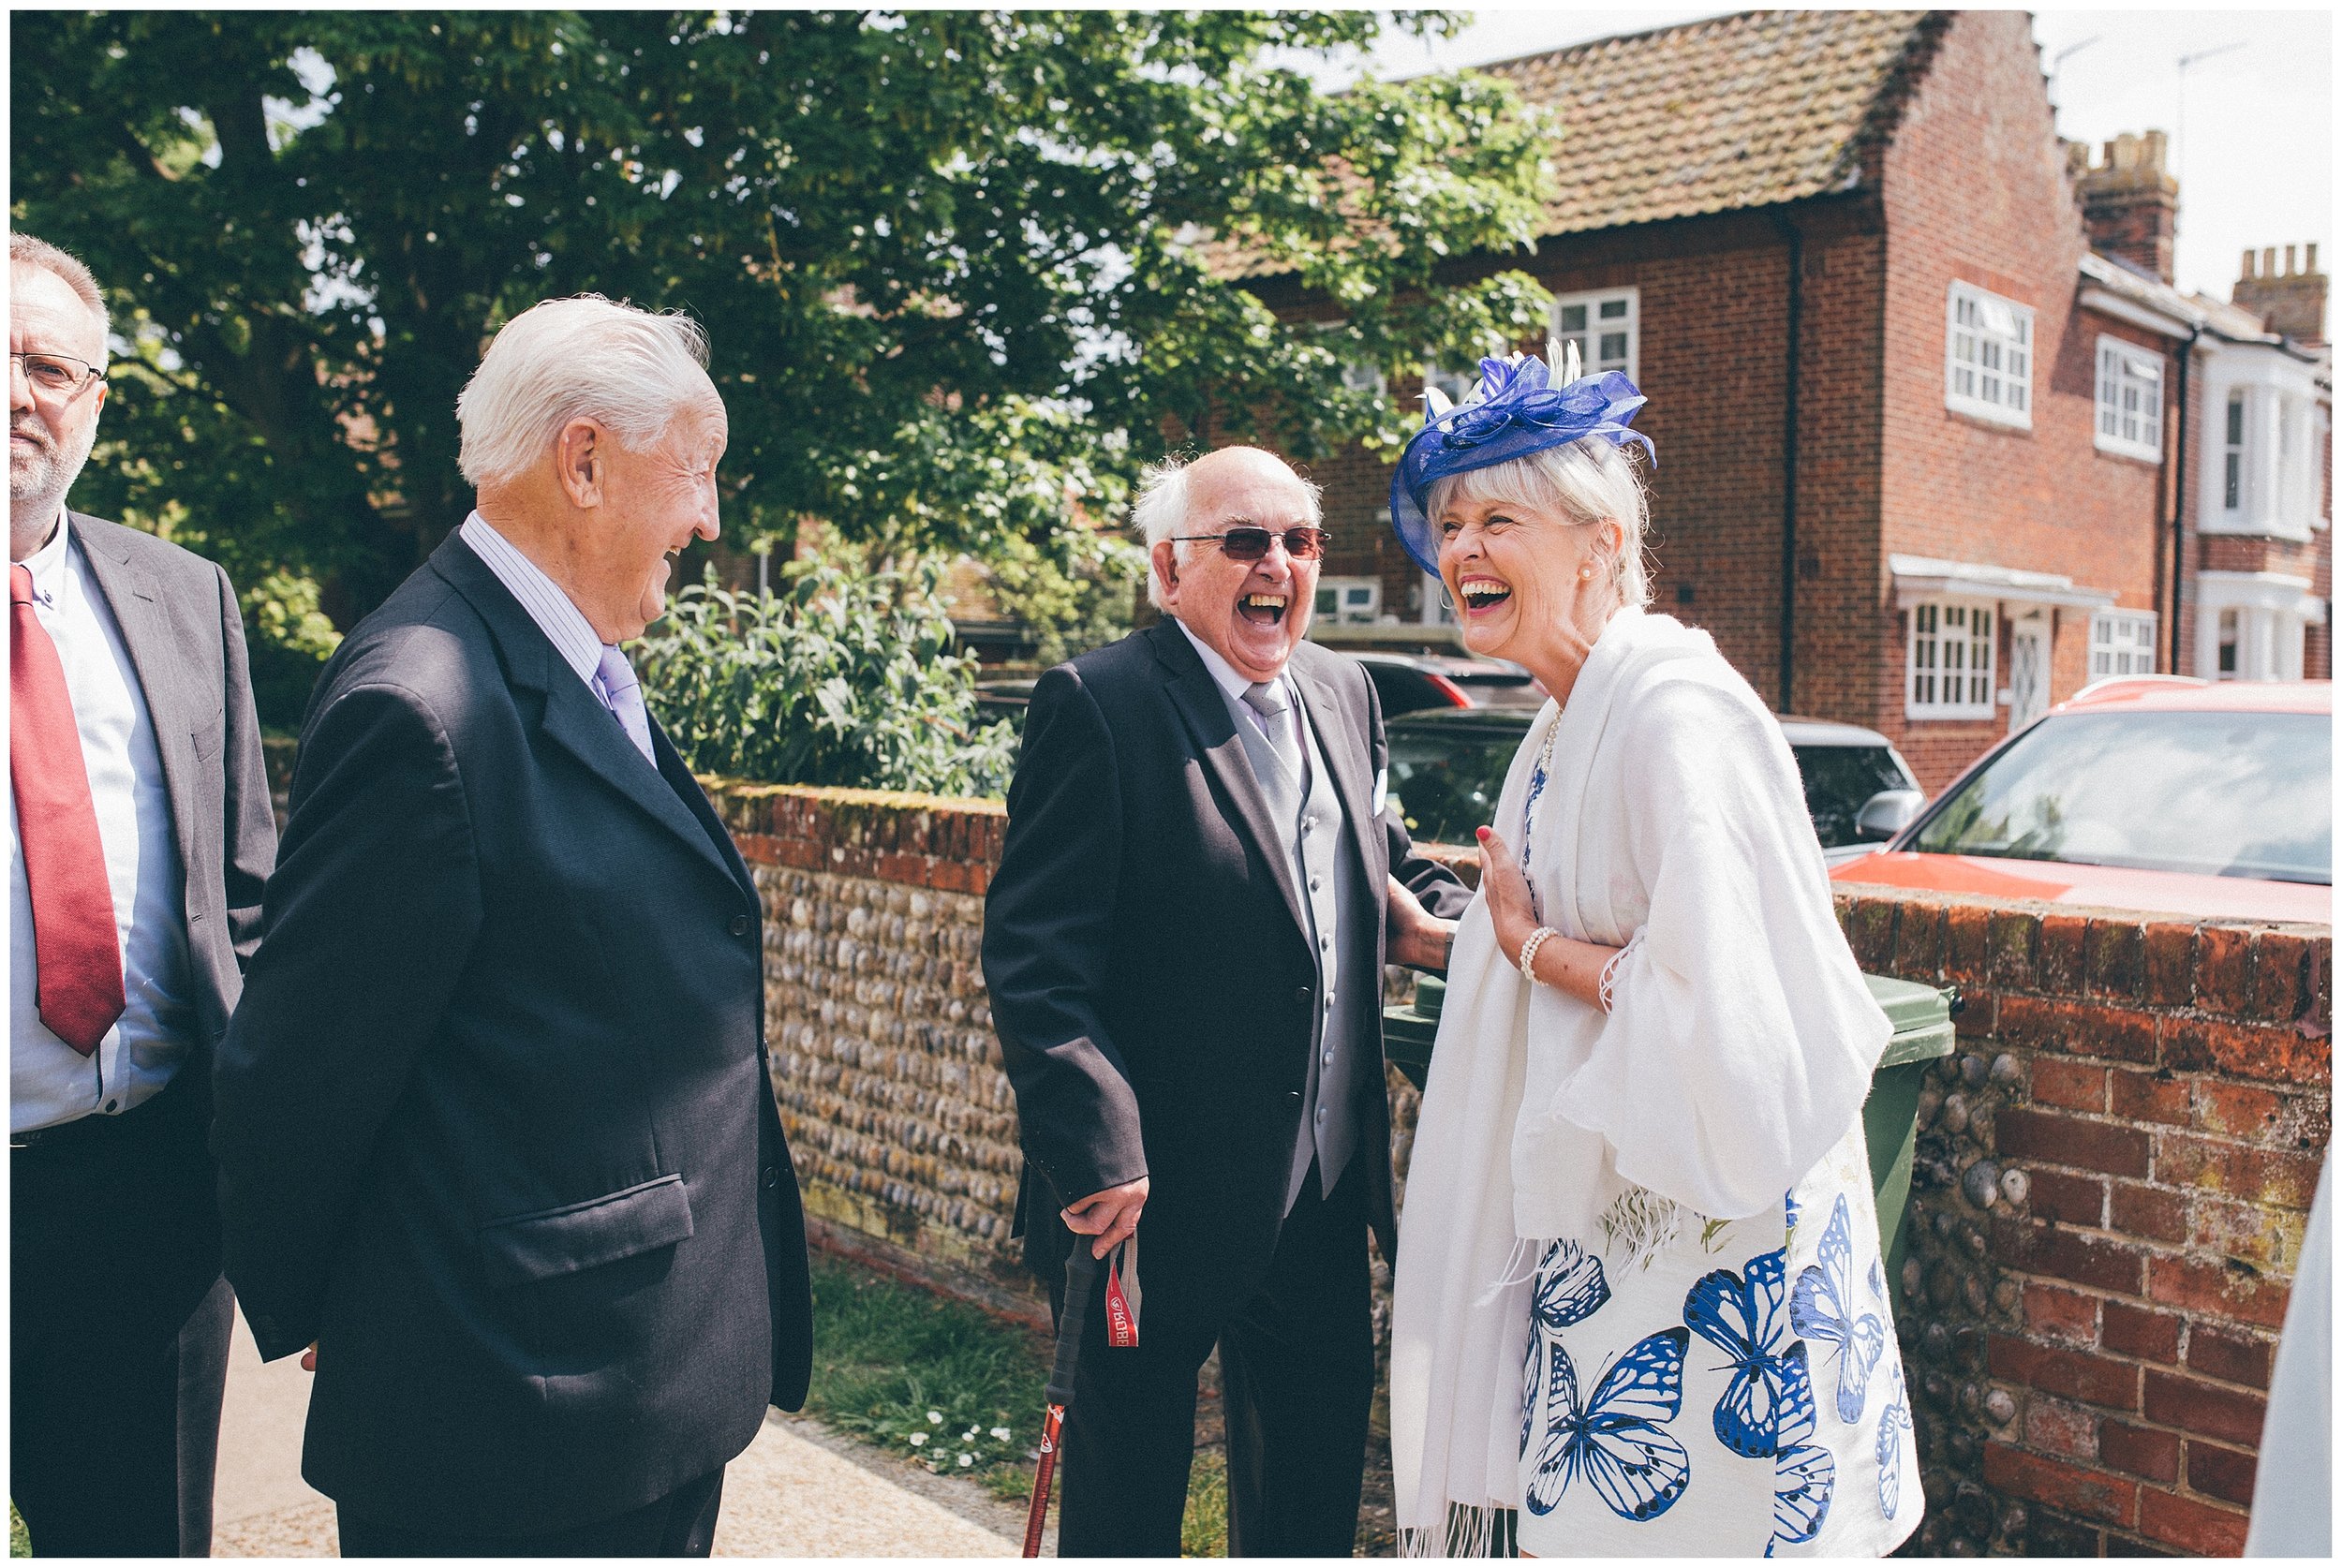 Guests at a Wedding at St Edmunds Church in Southwold.